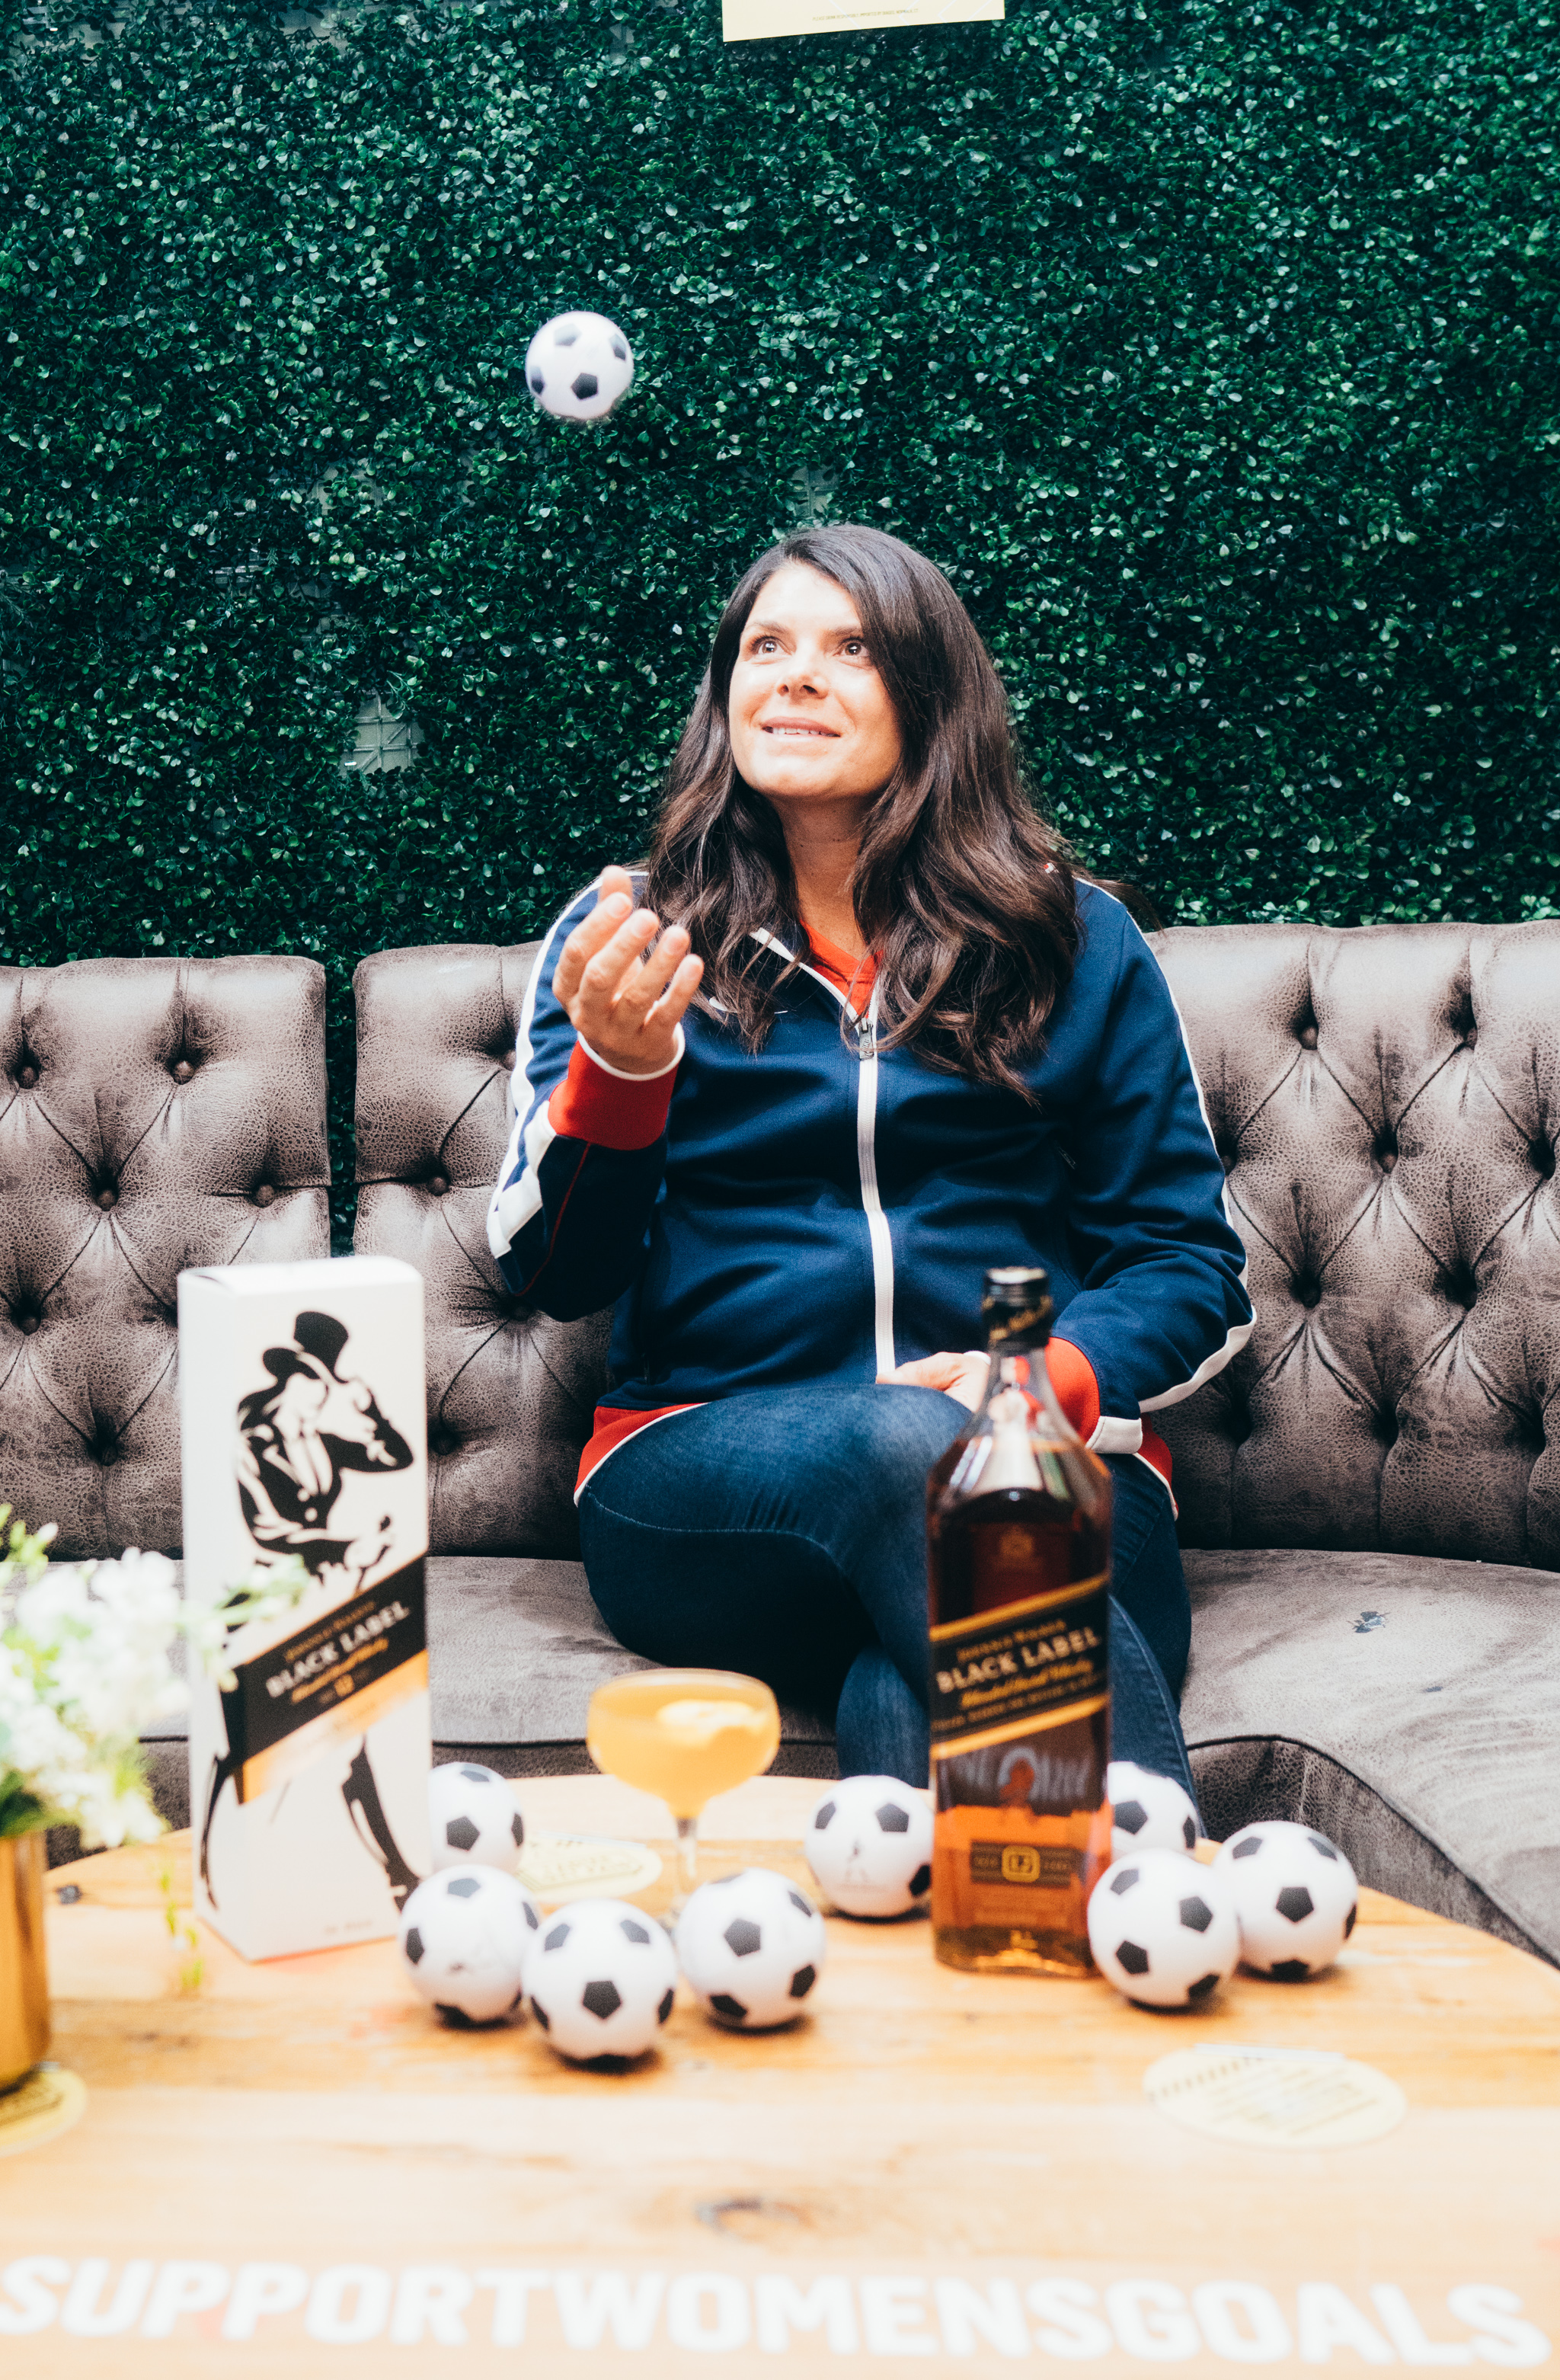 Mia Hamm at the Jane Walker by Johnnie Walker Equalizer Watch Party in NYC supporting equal pay. (Jose Silva)